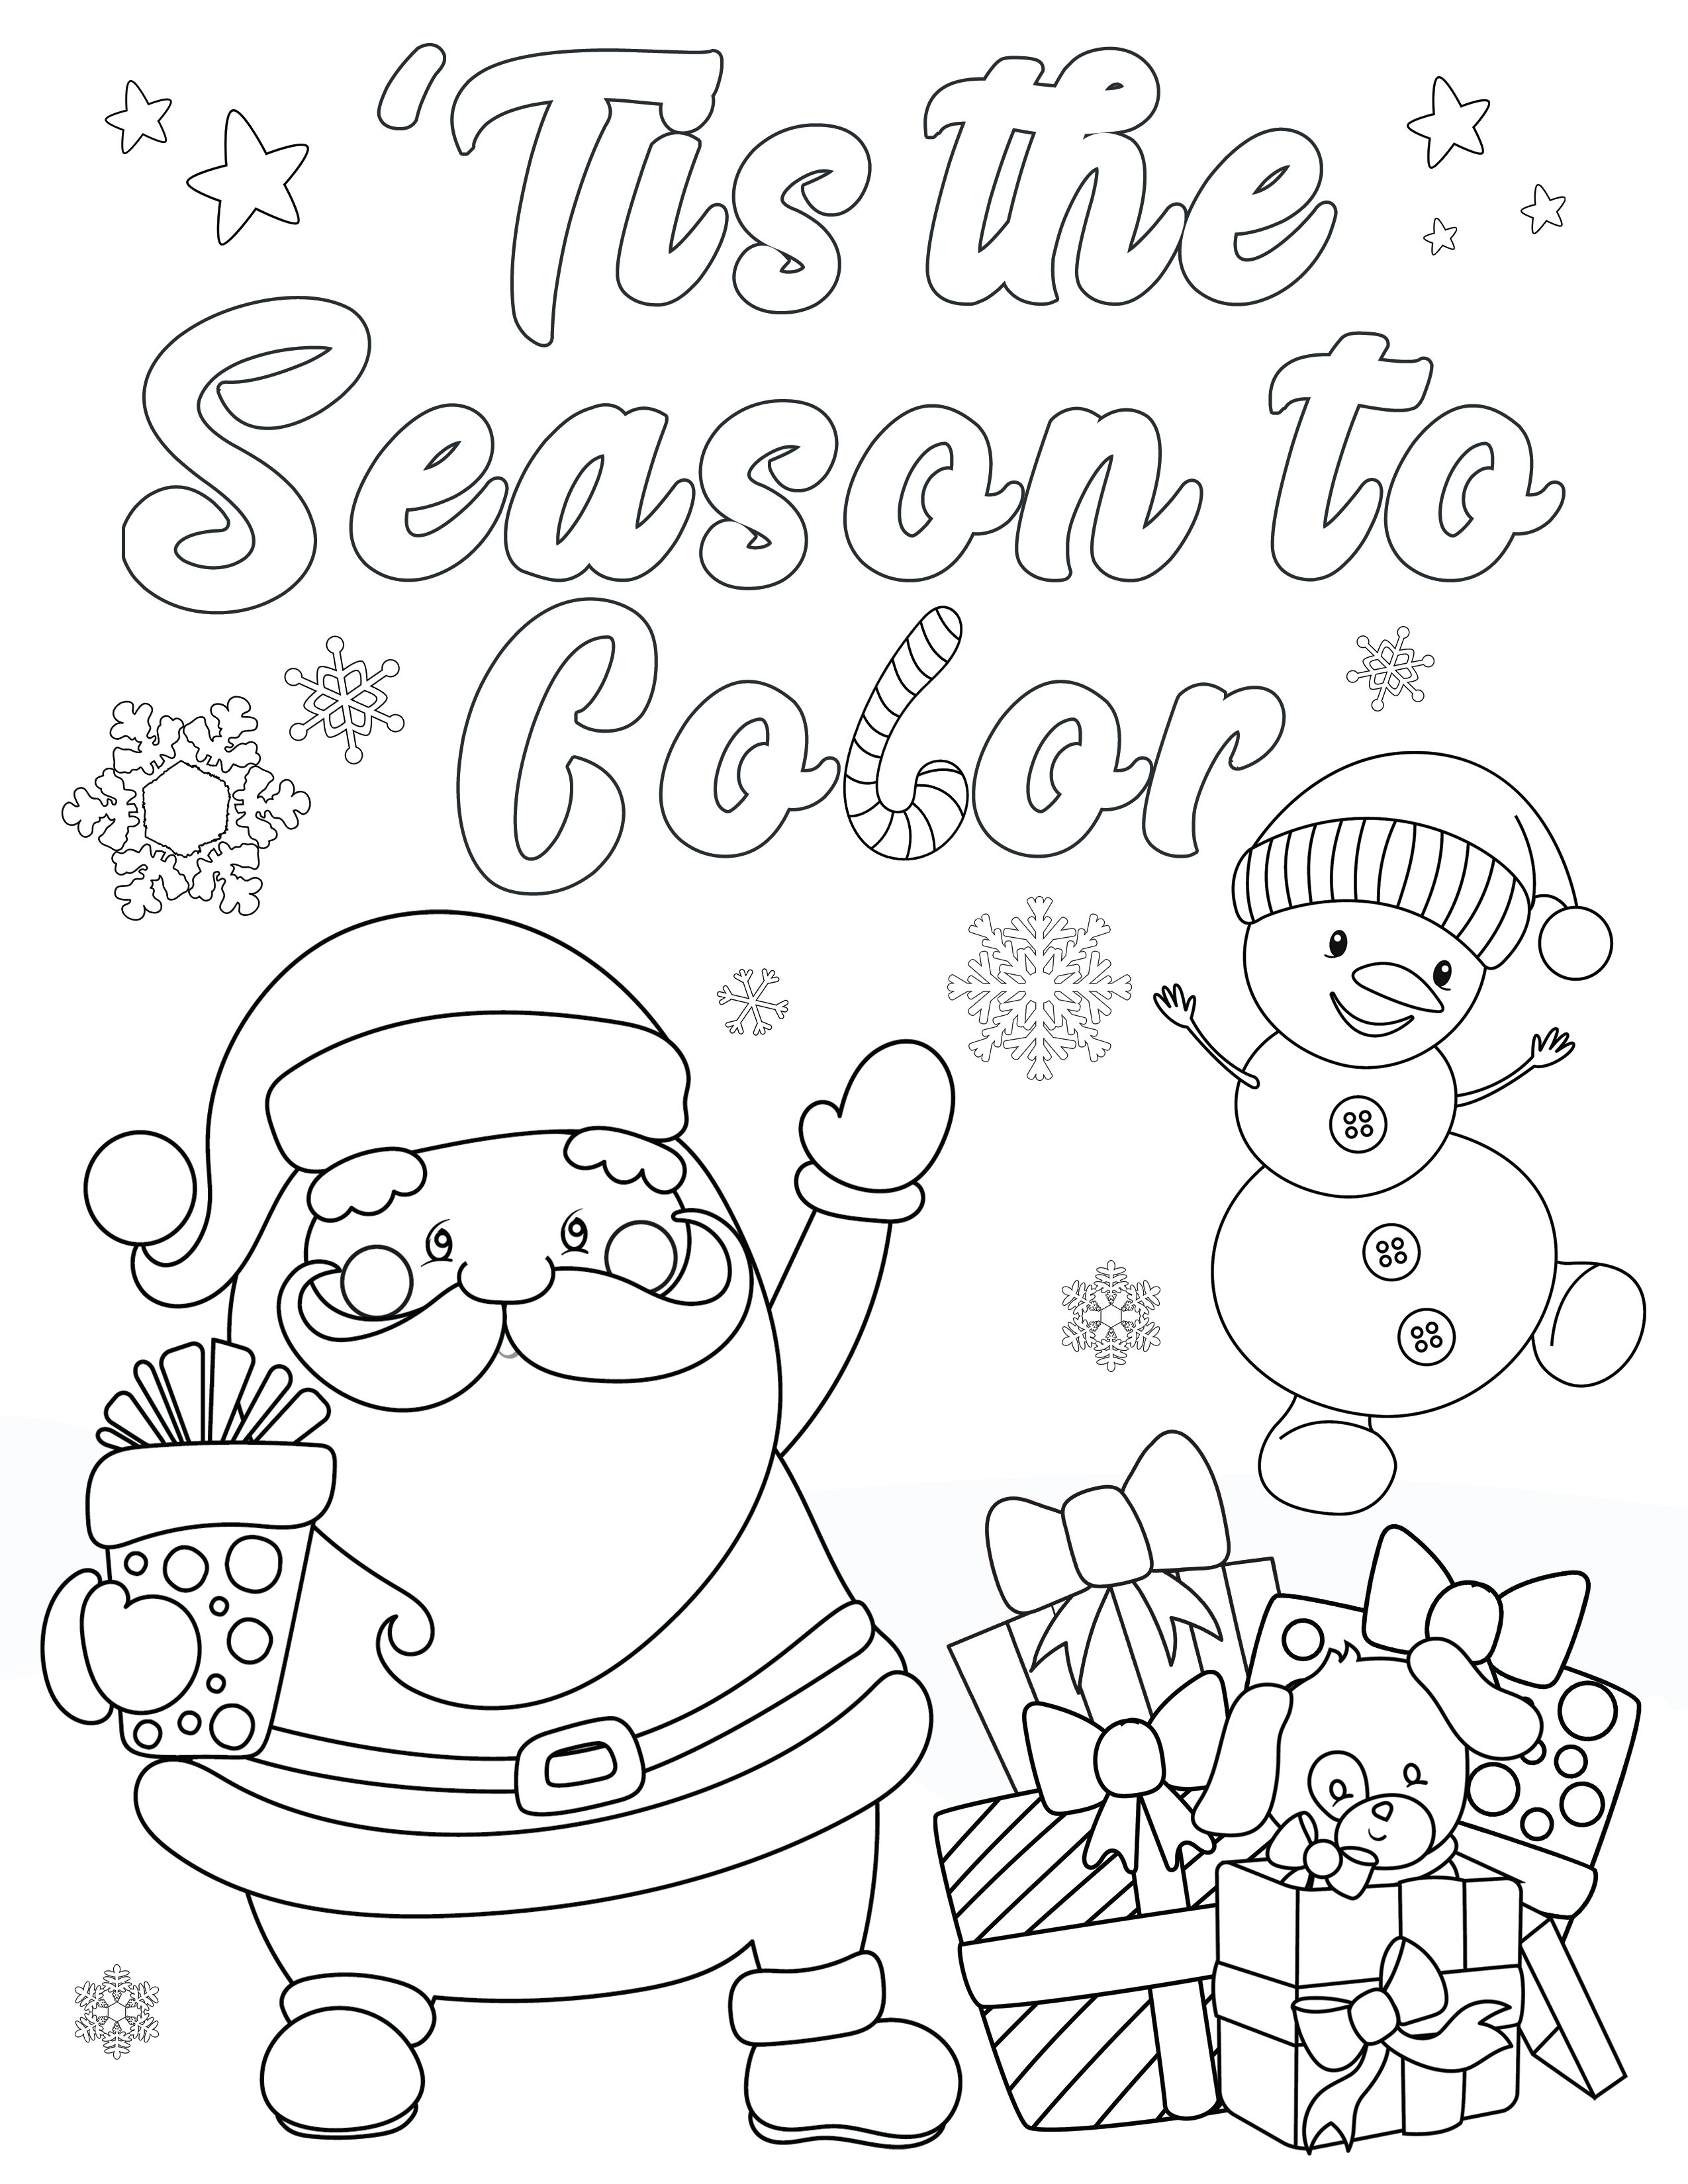 FREE Christmas Coloring Page 'Tis the Season to Color! Happiness is